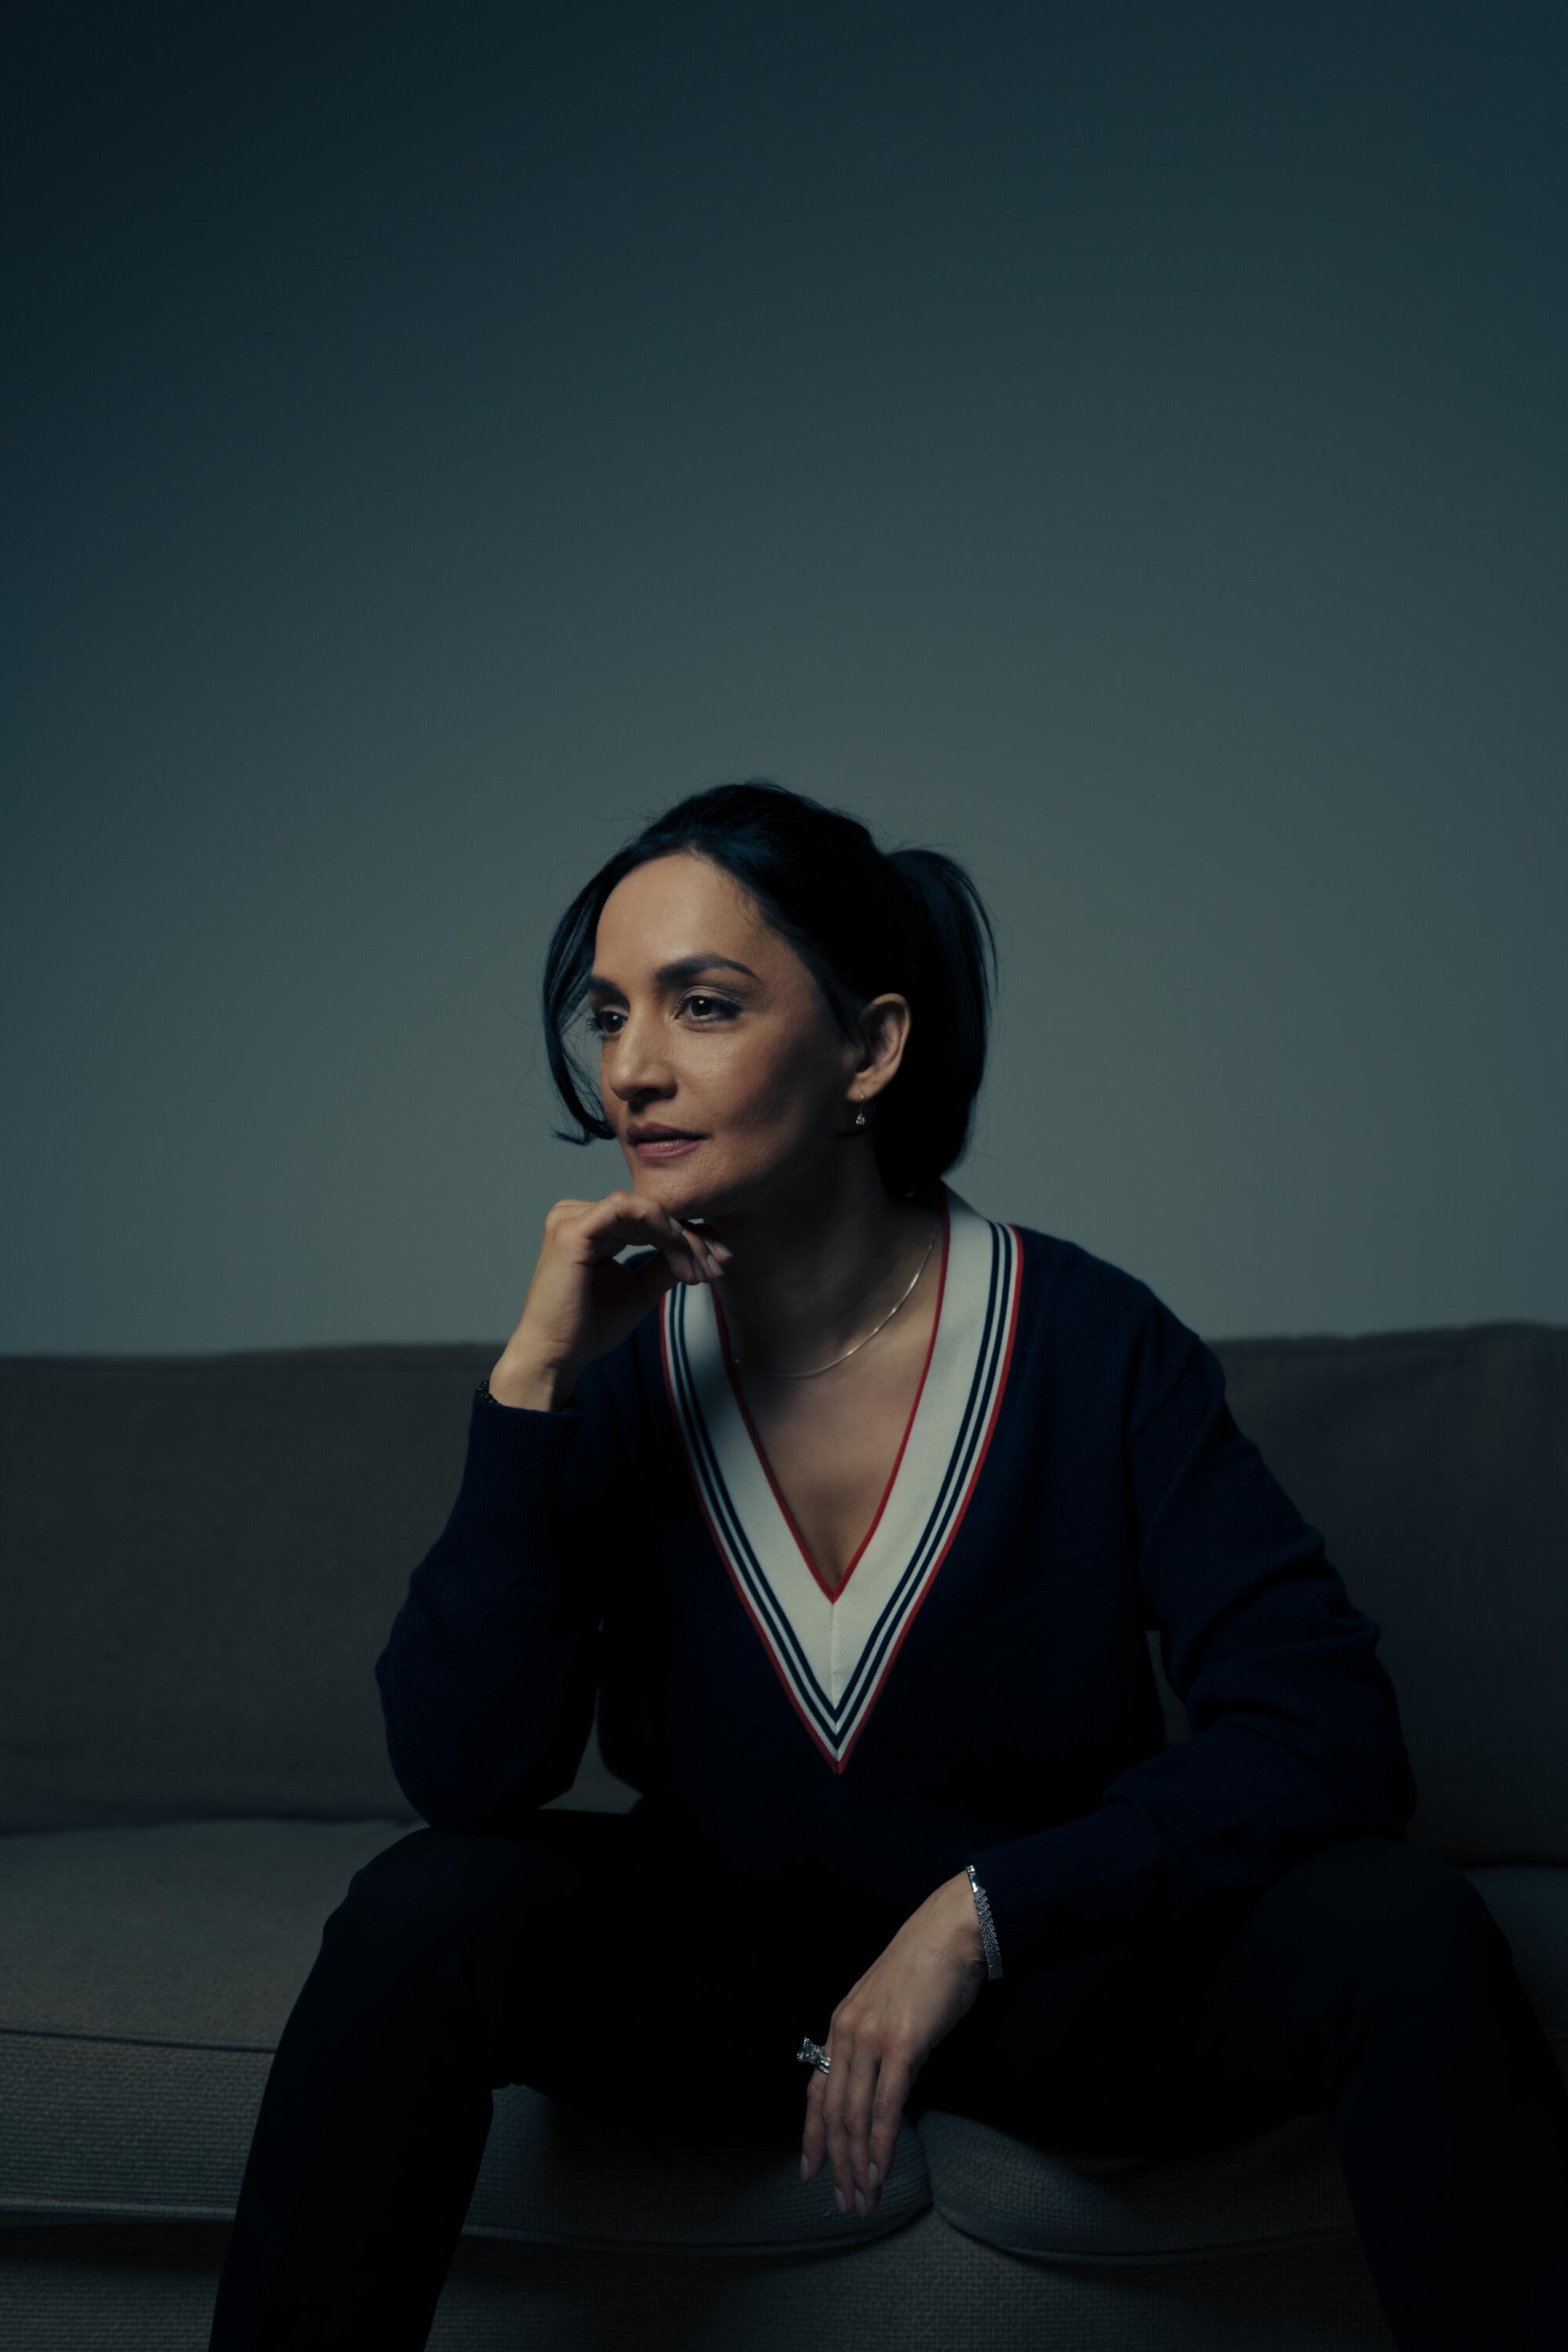 Archie Panjabi, seated, in a dark sweater with a white V-neck